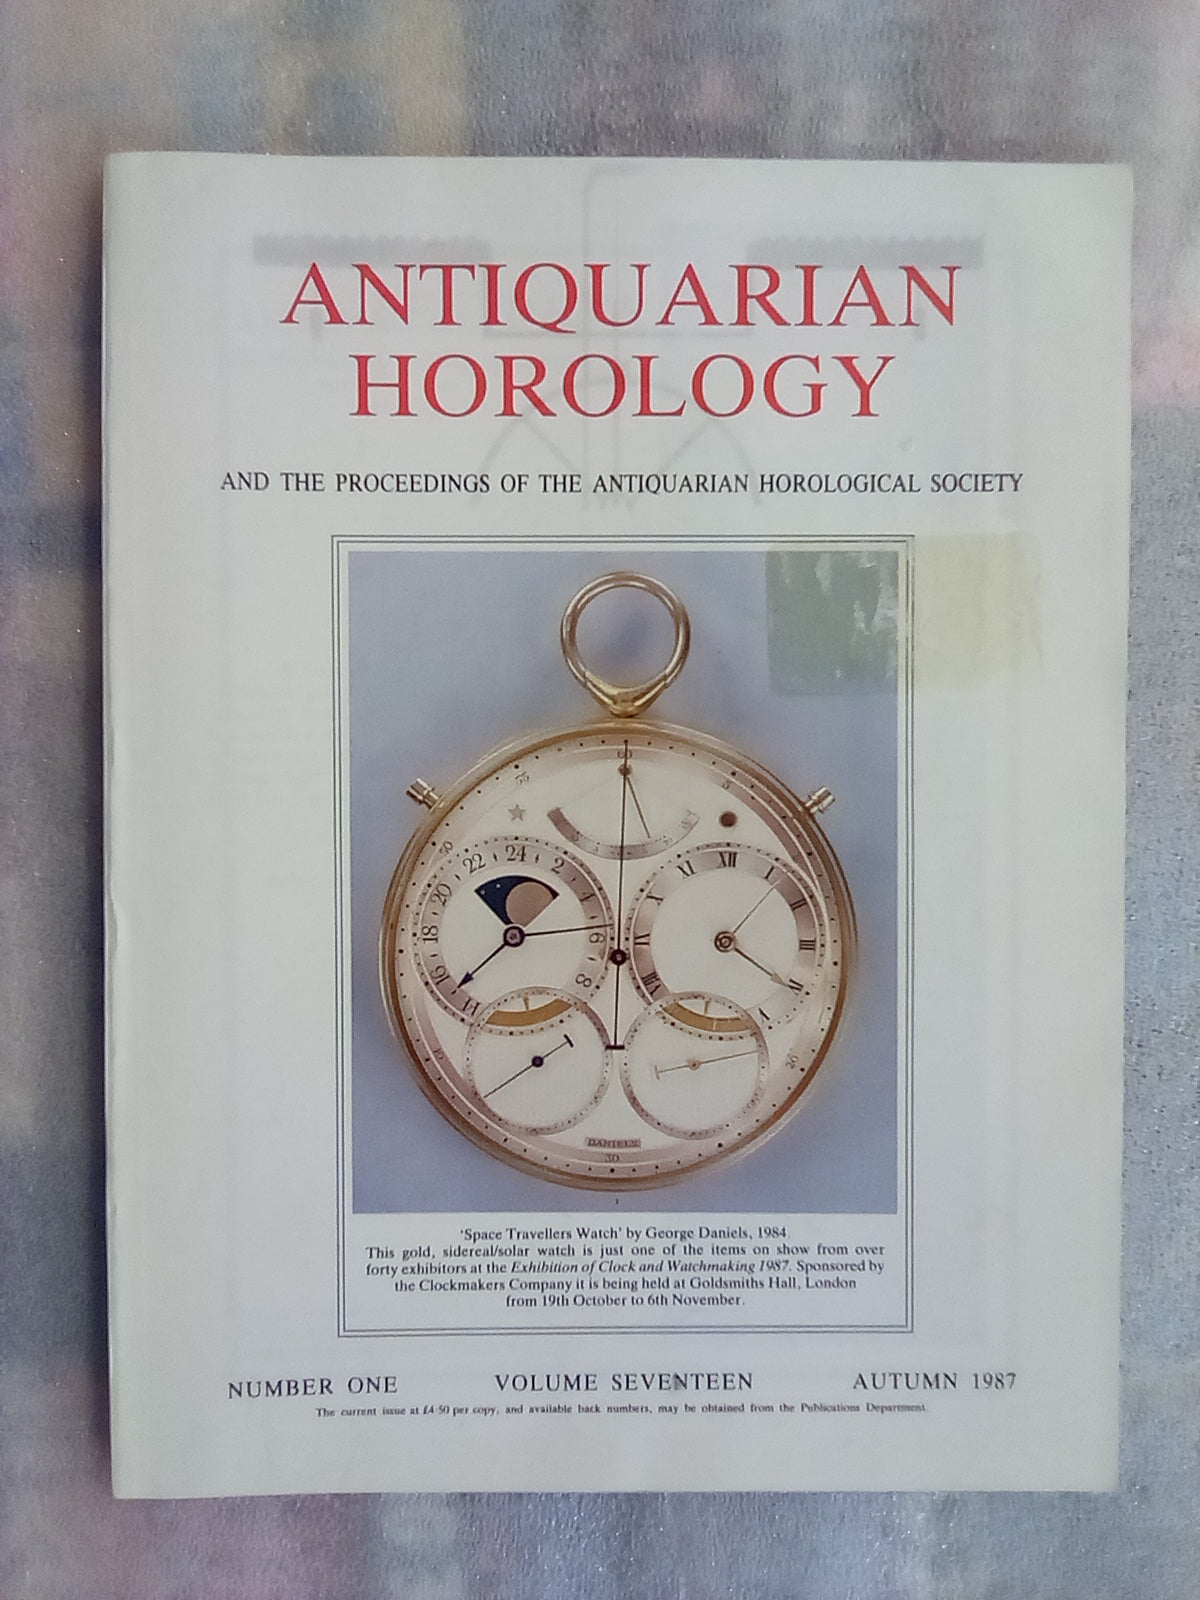 Antiquarian Horology Journal - 6 Issues from 1986-1987